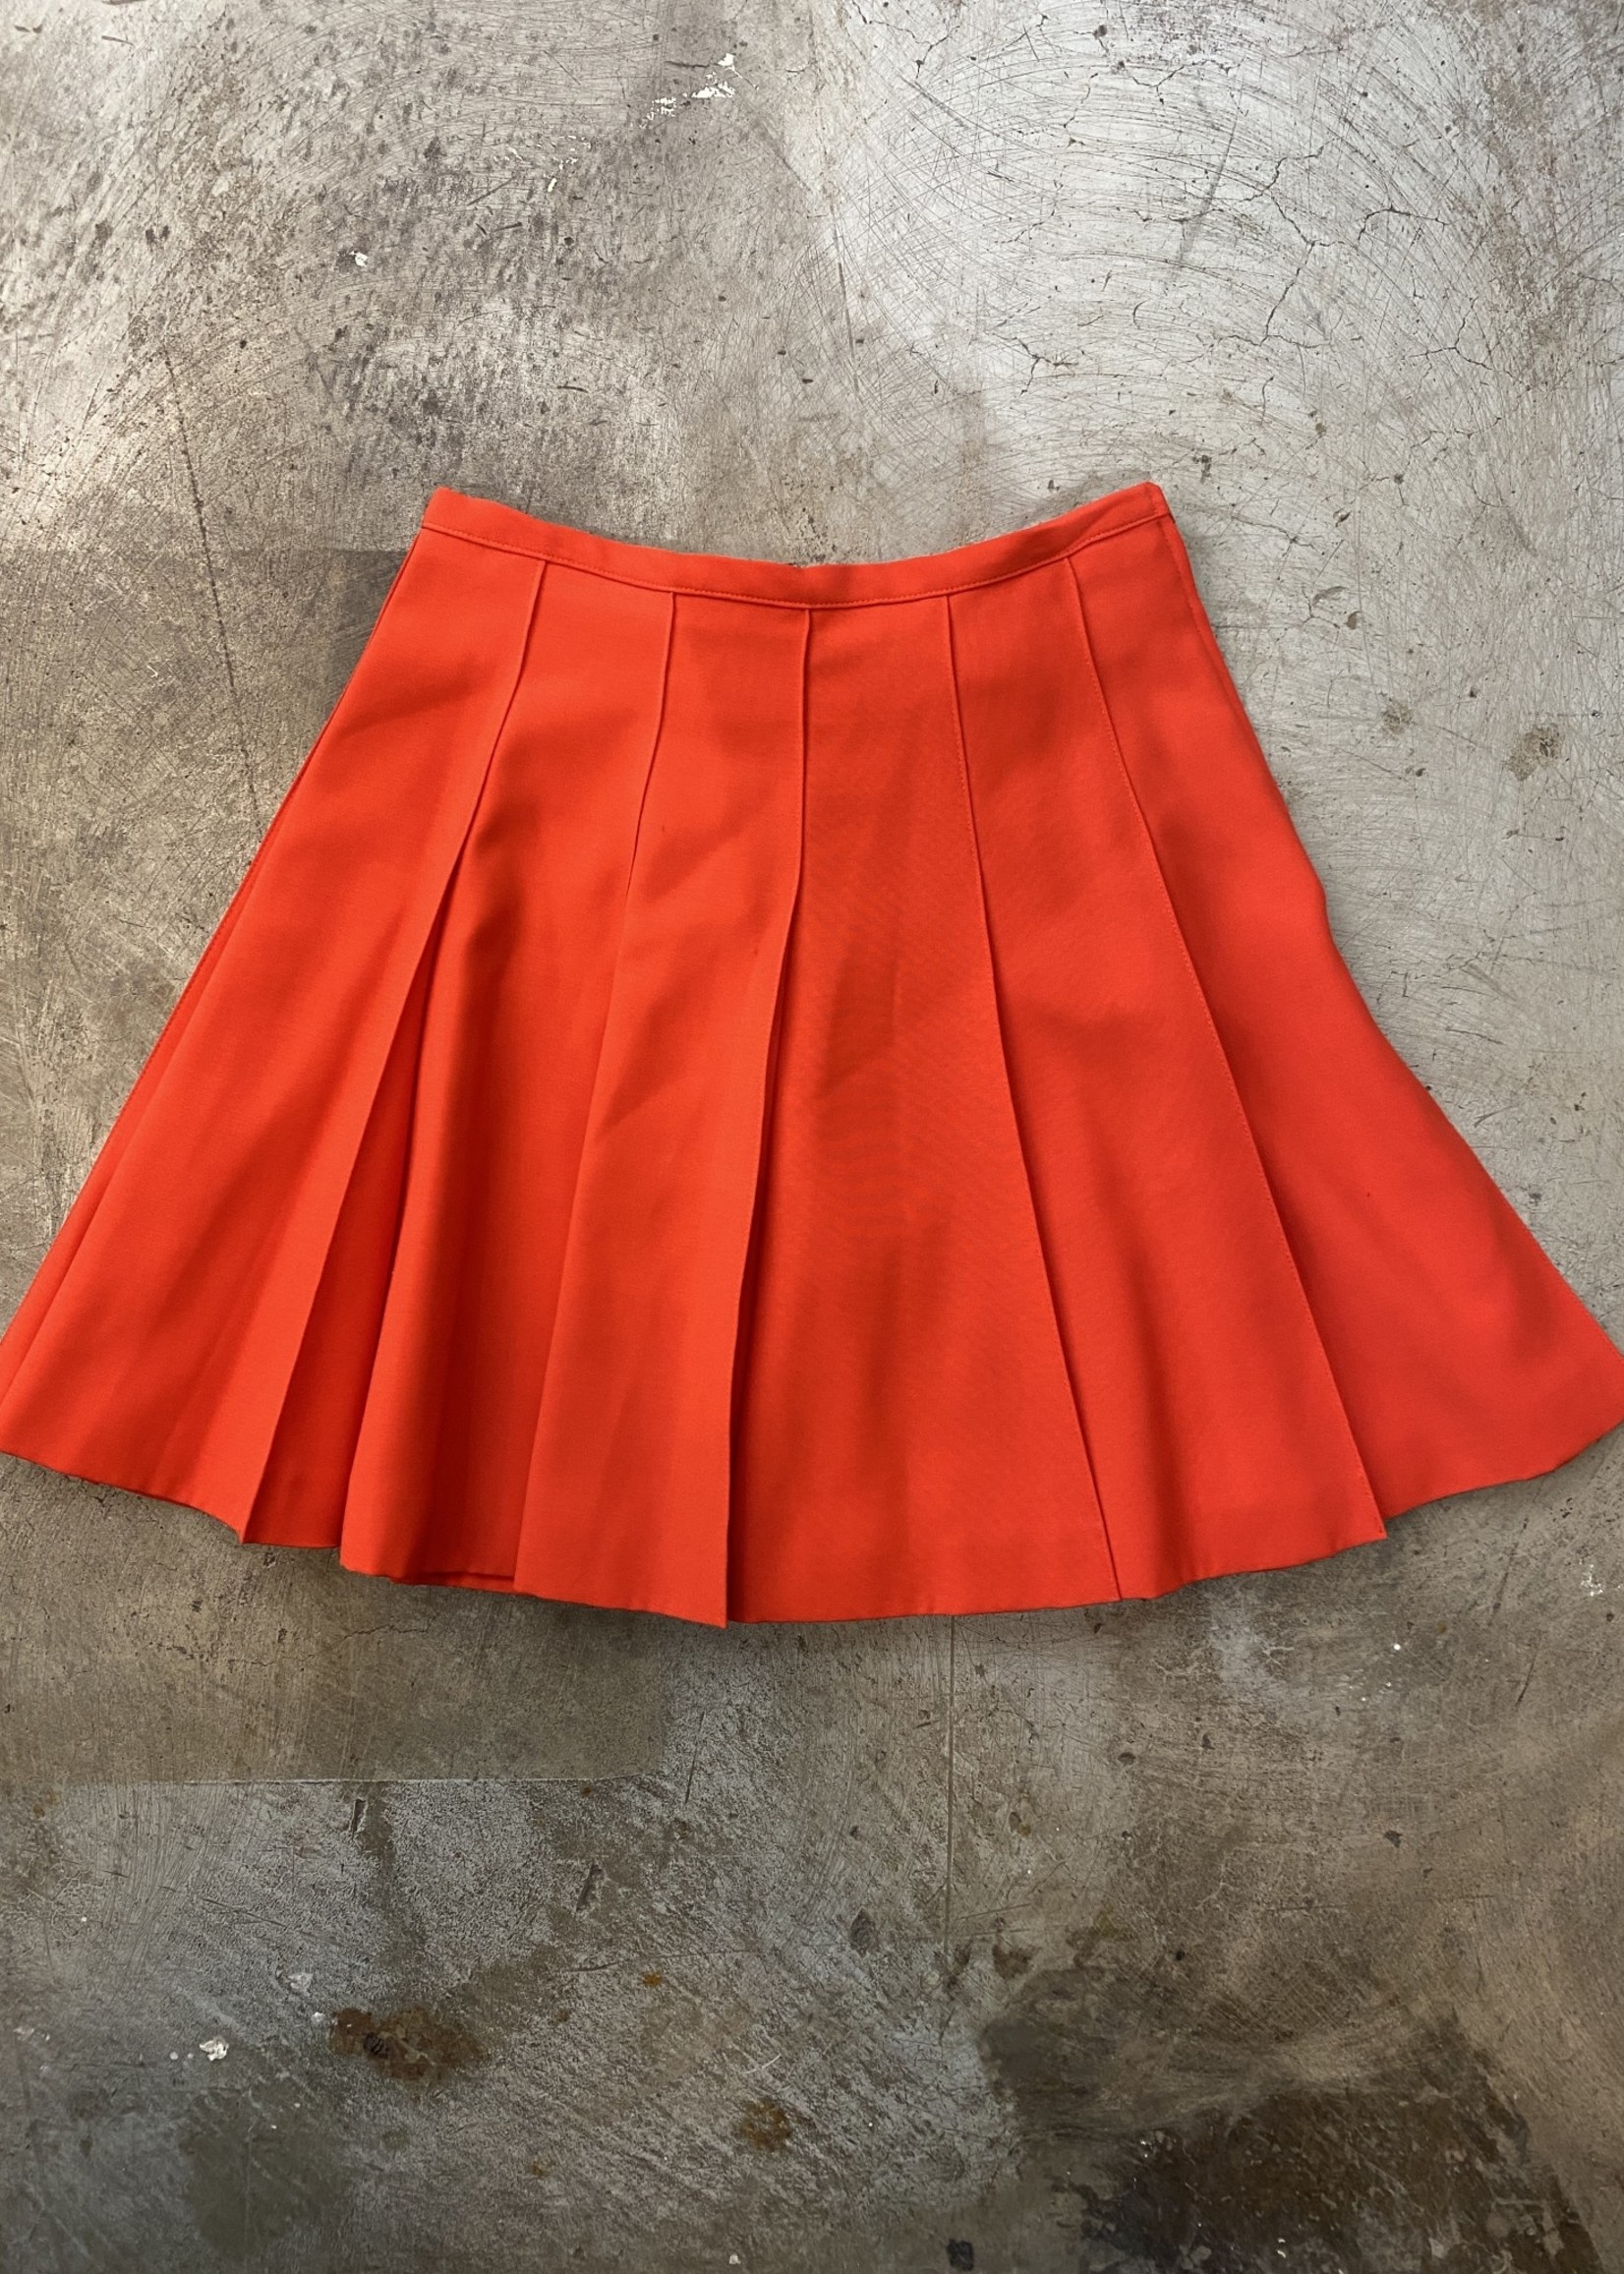 State of Claude Montana Vintage Red Pleated Skirt 26"/XS